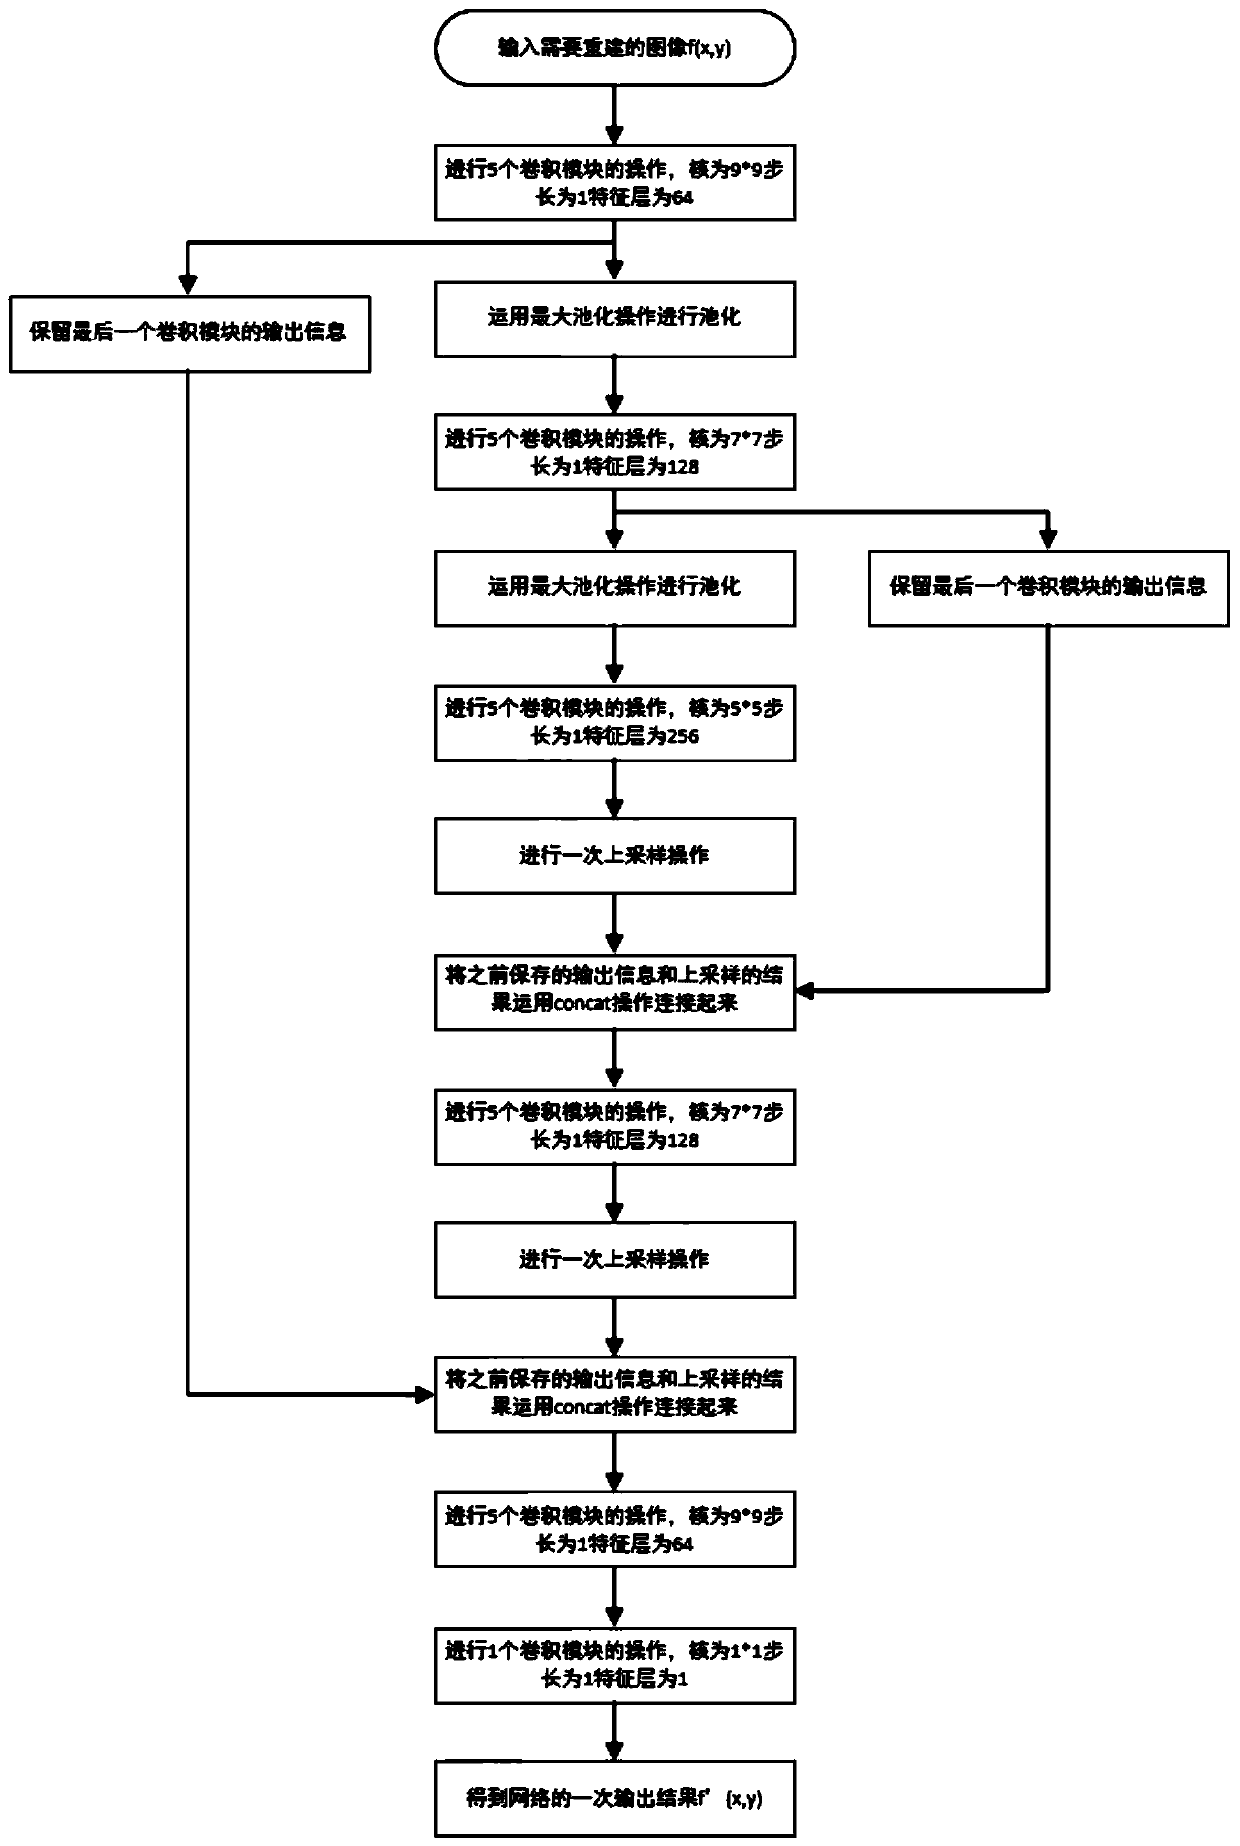 Method for calculating ghost imaging reconstruction recovery based on U-Net network